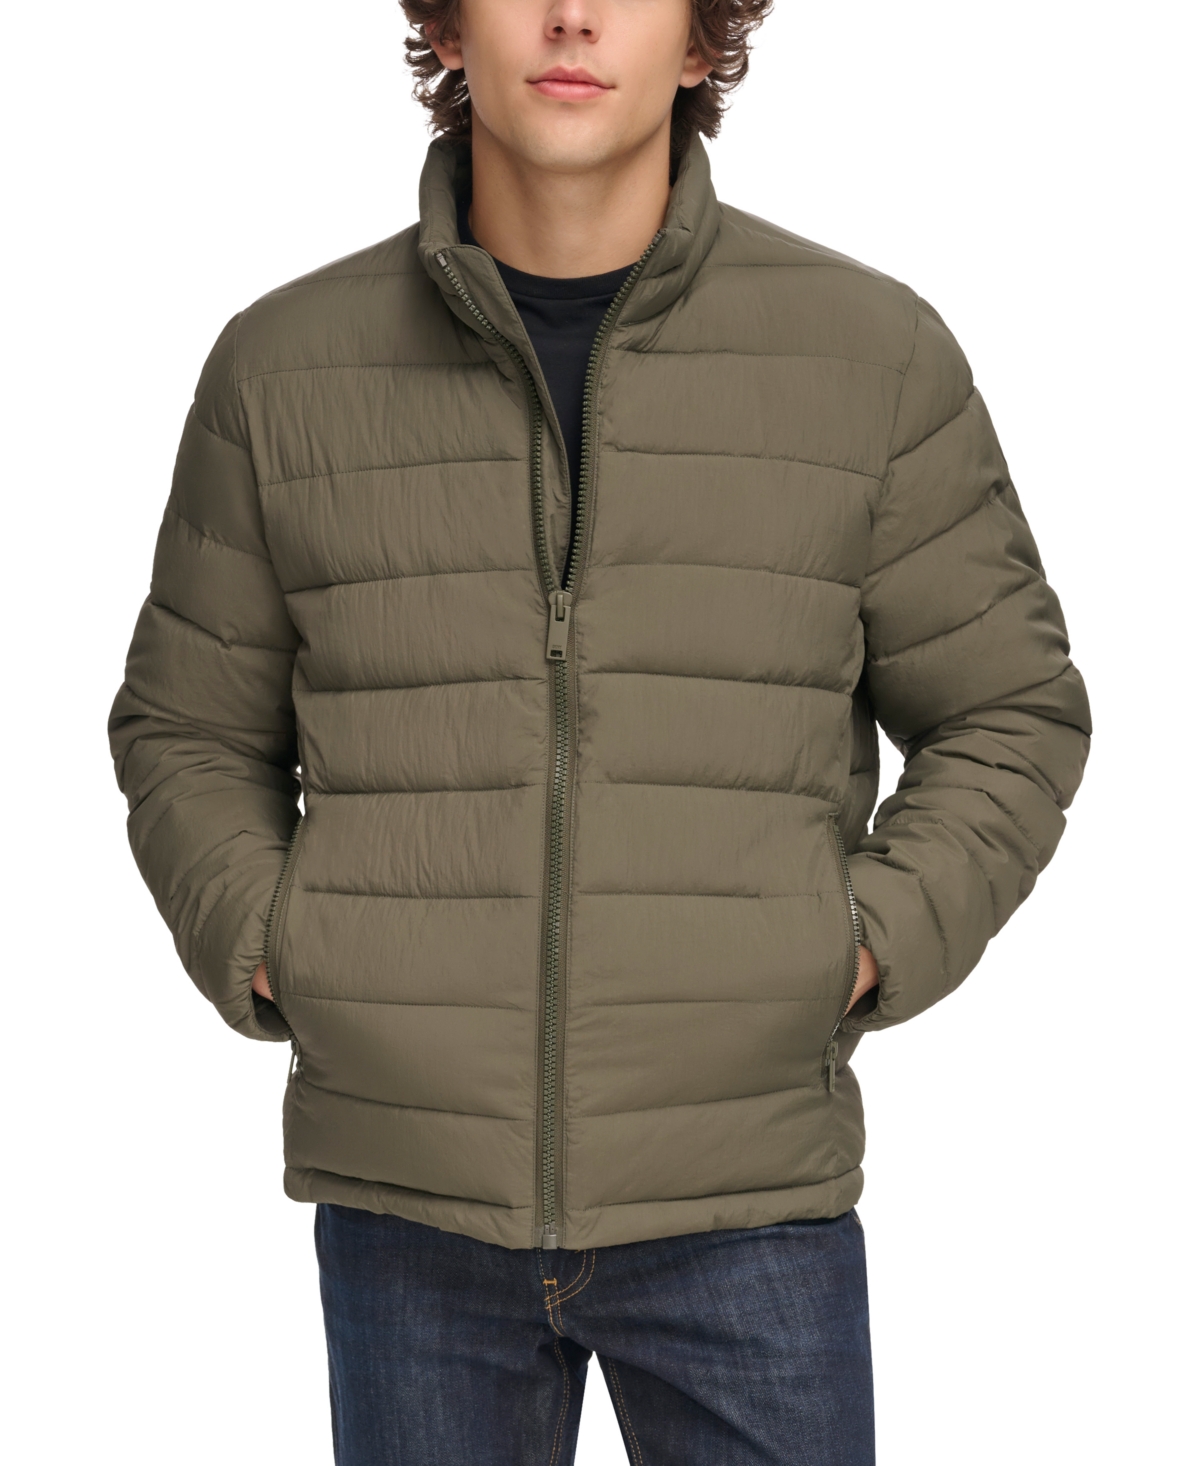 Dkny Men's Quilted Full-zip Stand Collar Puffer Jacket In Olive